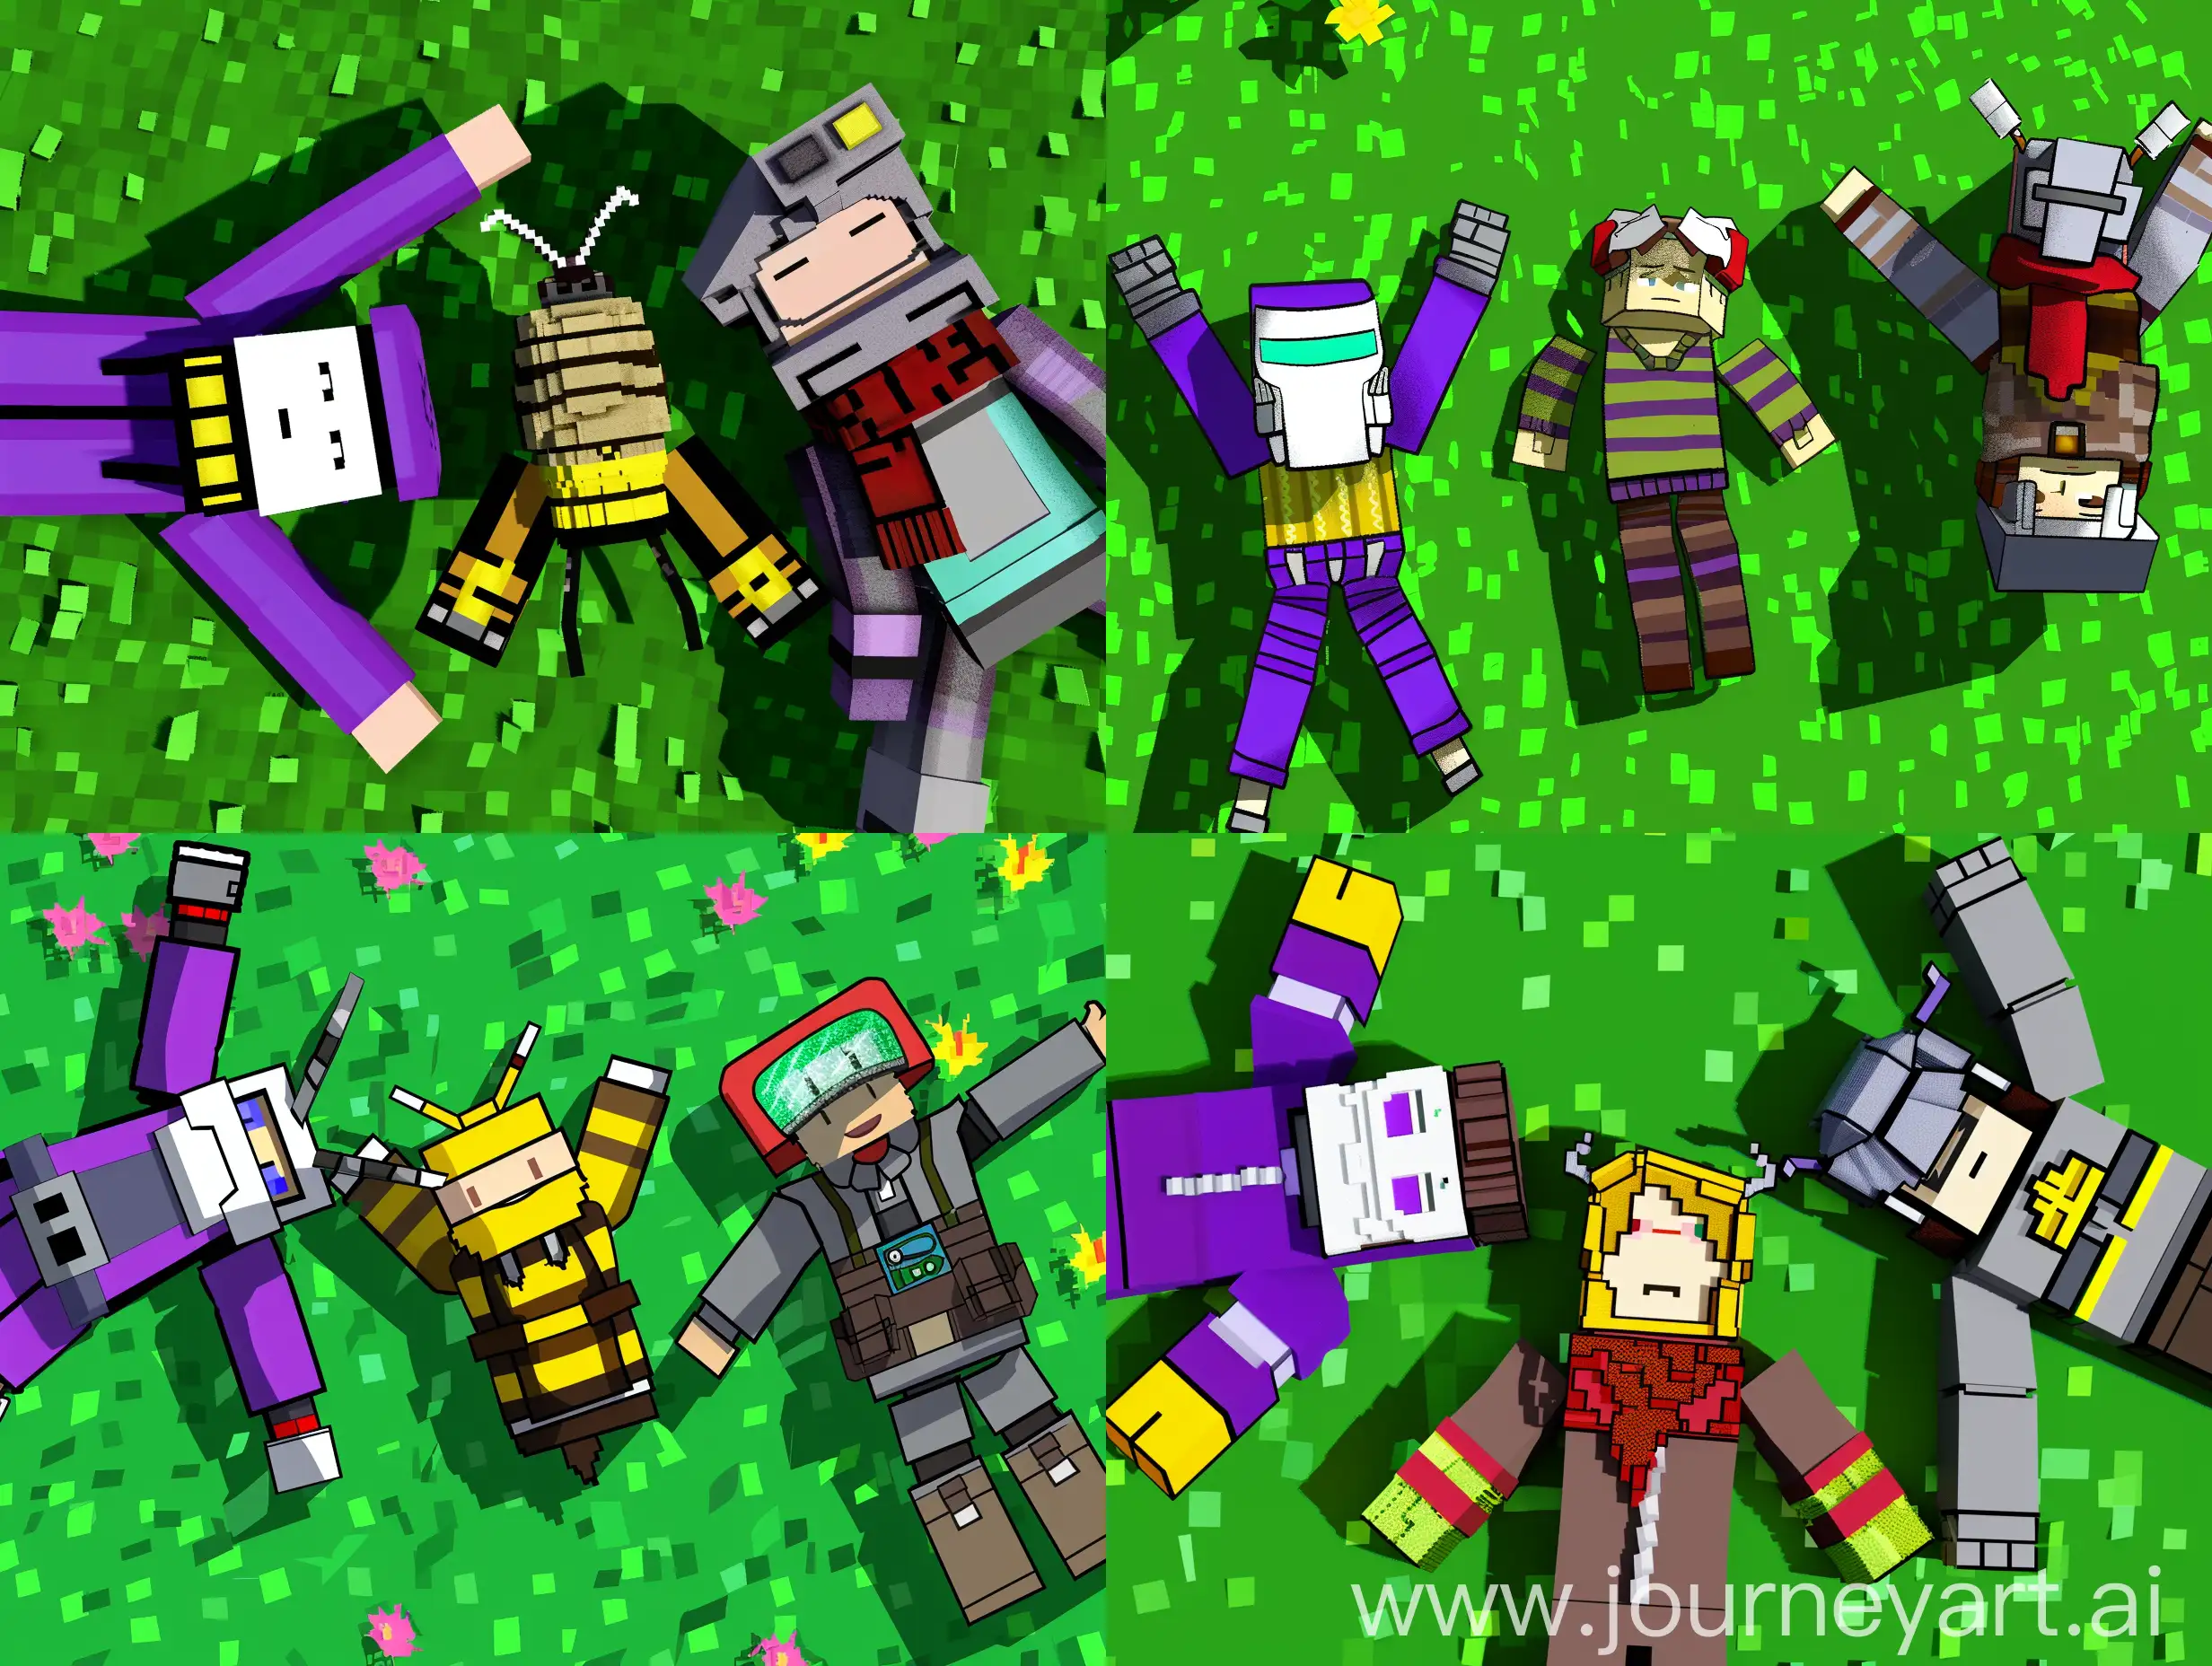 Colorful-Characters-in-Minecraft-Style-Purple-Suit-Bee-Sweater-and-Engineer-with-Red-Scarf